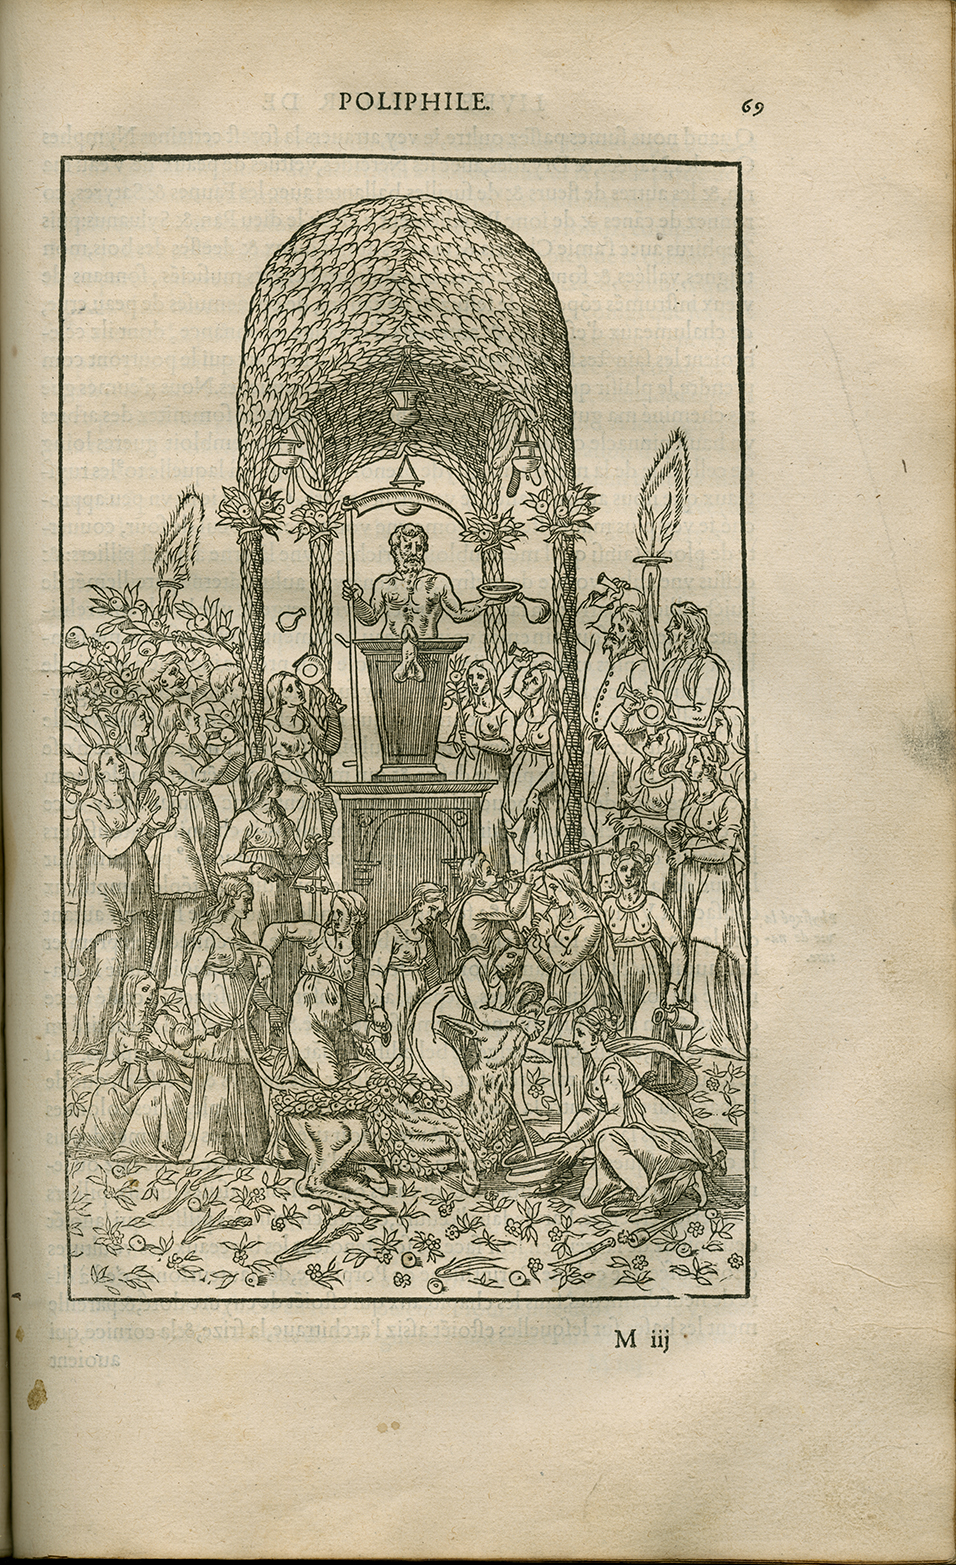 Full-page woodcut depicting the procession of Priapus, the Greek god of animal and vegetable fertility. Hypnerotomachie, ou Discours du songe de Poliphile Ed: Jean Martin Paris: Jean le Blanc for Jacques Kerver, 1561 Fol. 69r. Loan courtesy of William P. Heidrich